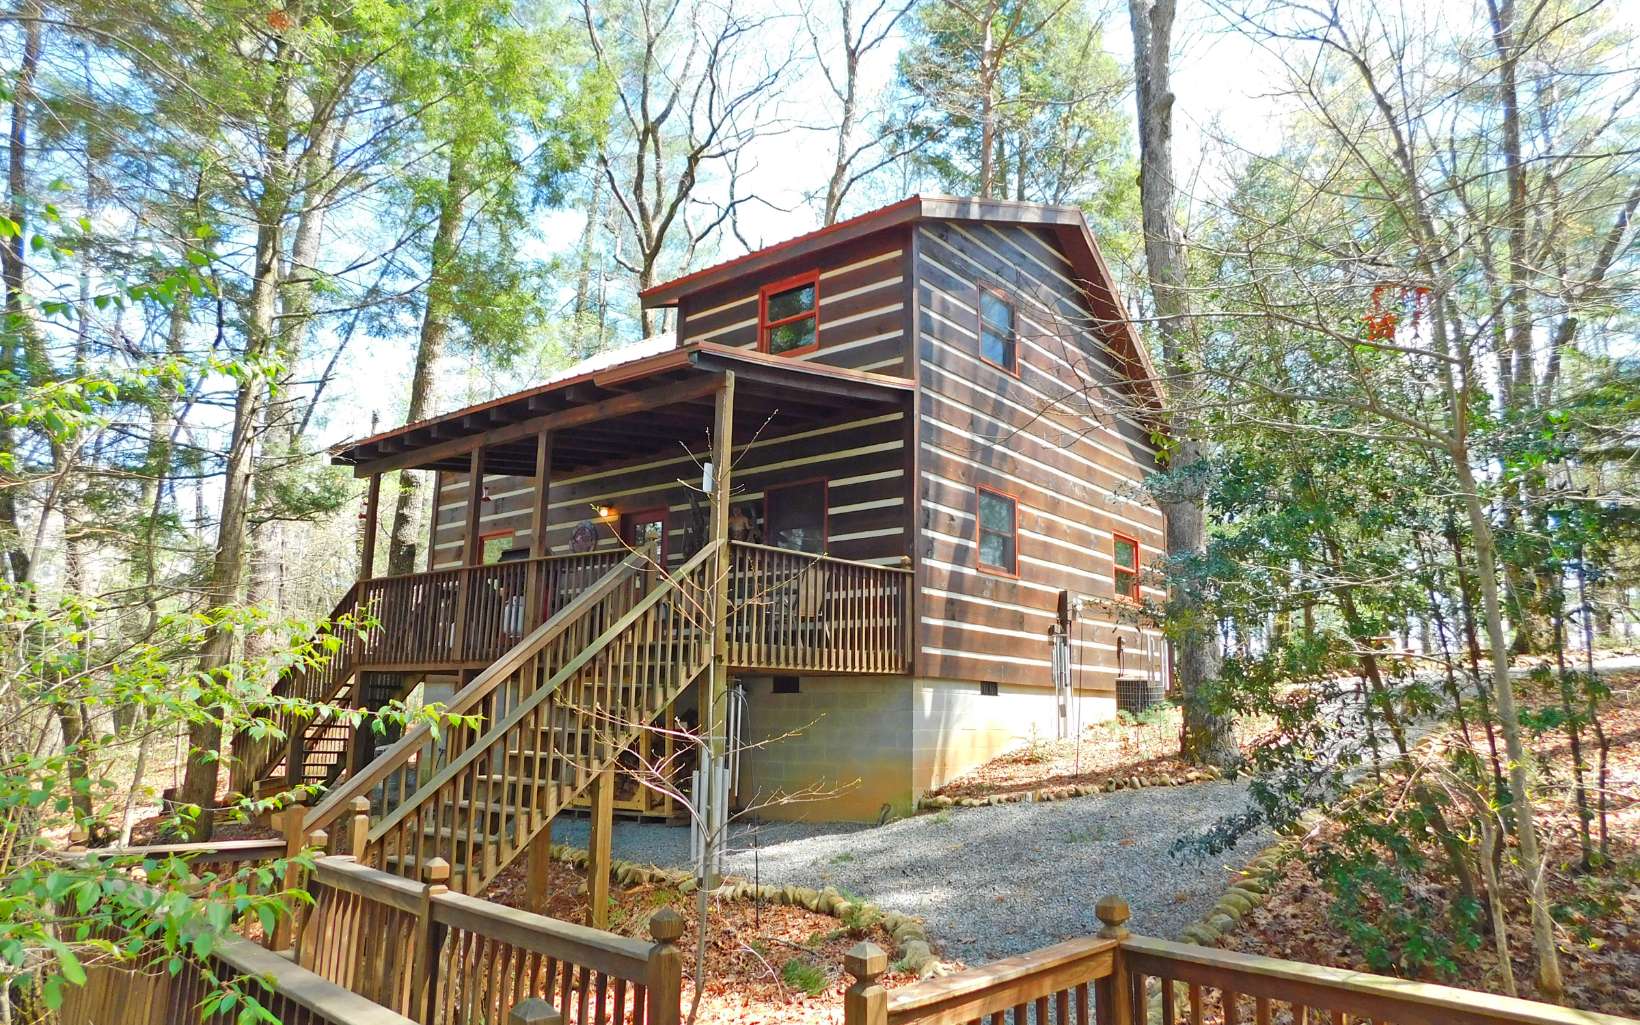 Truly A Cabin in the Woods! This traditional 2/2 cabin is tucked away in beautiful Blue Ridge Ga. With a healthy rental history that can be expanded it will be the perfect investment property. Furniture included for a Turn Key Cabin.